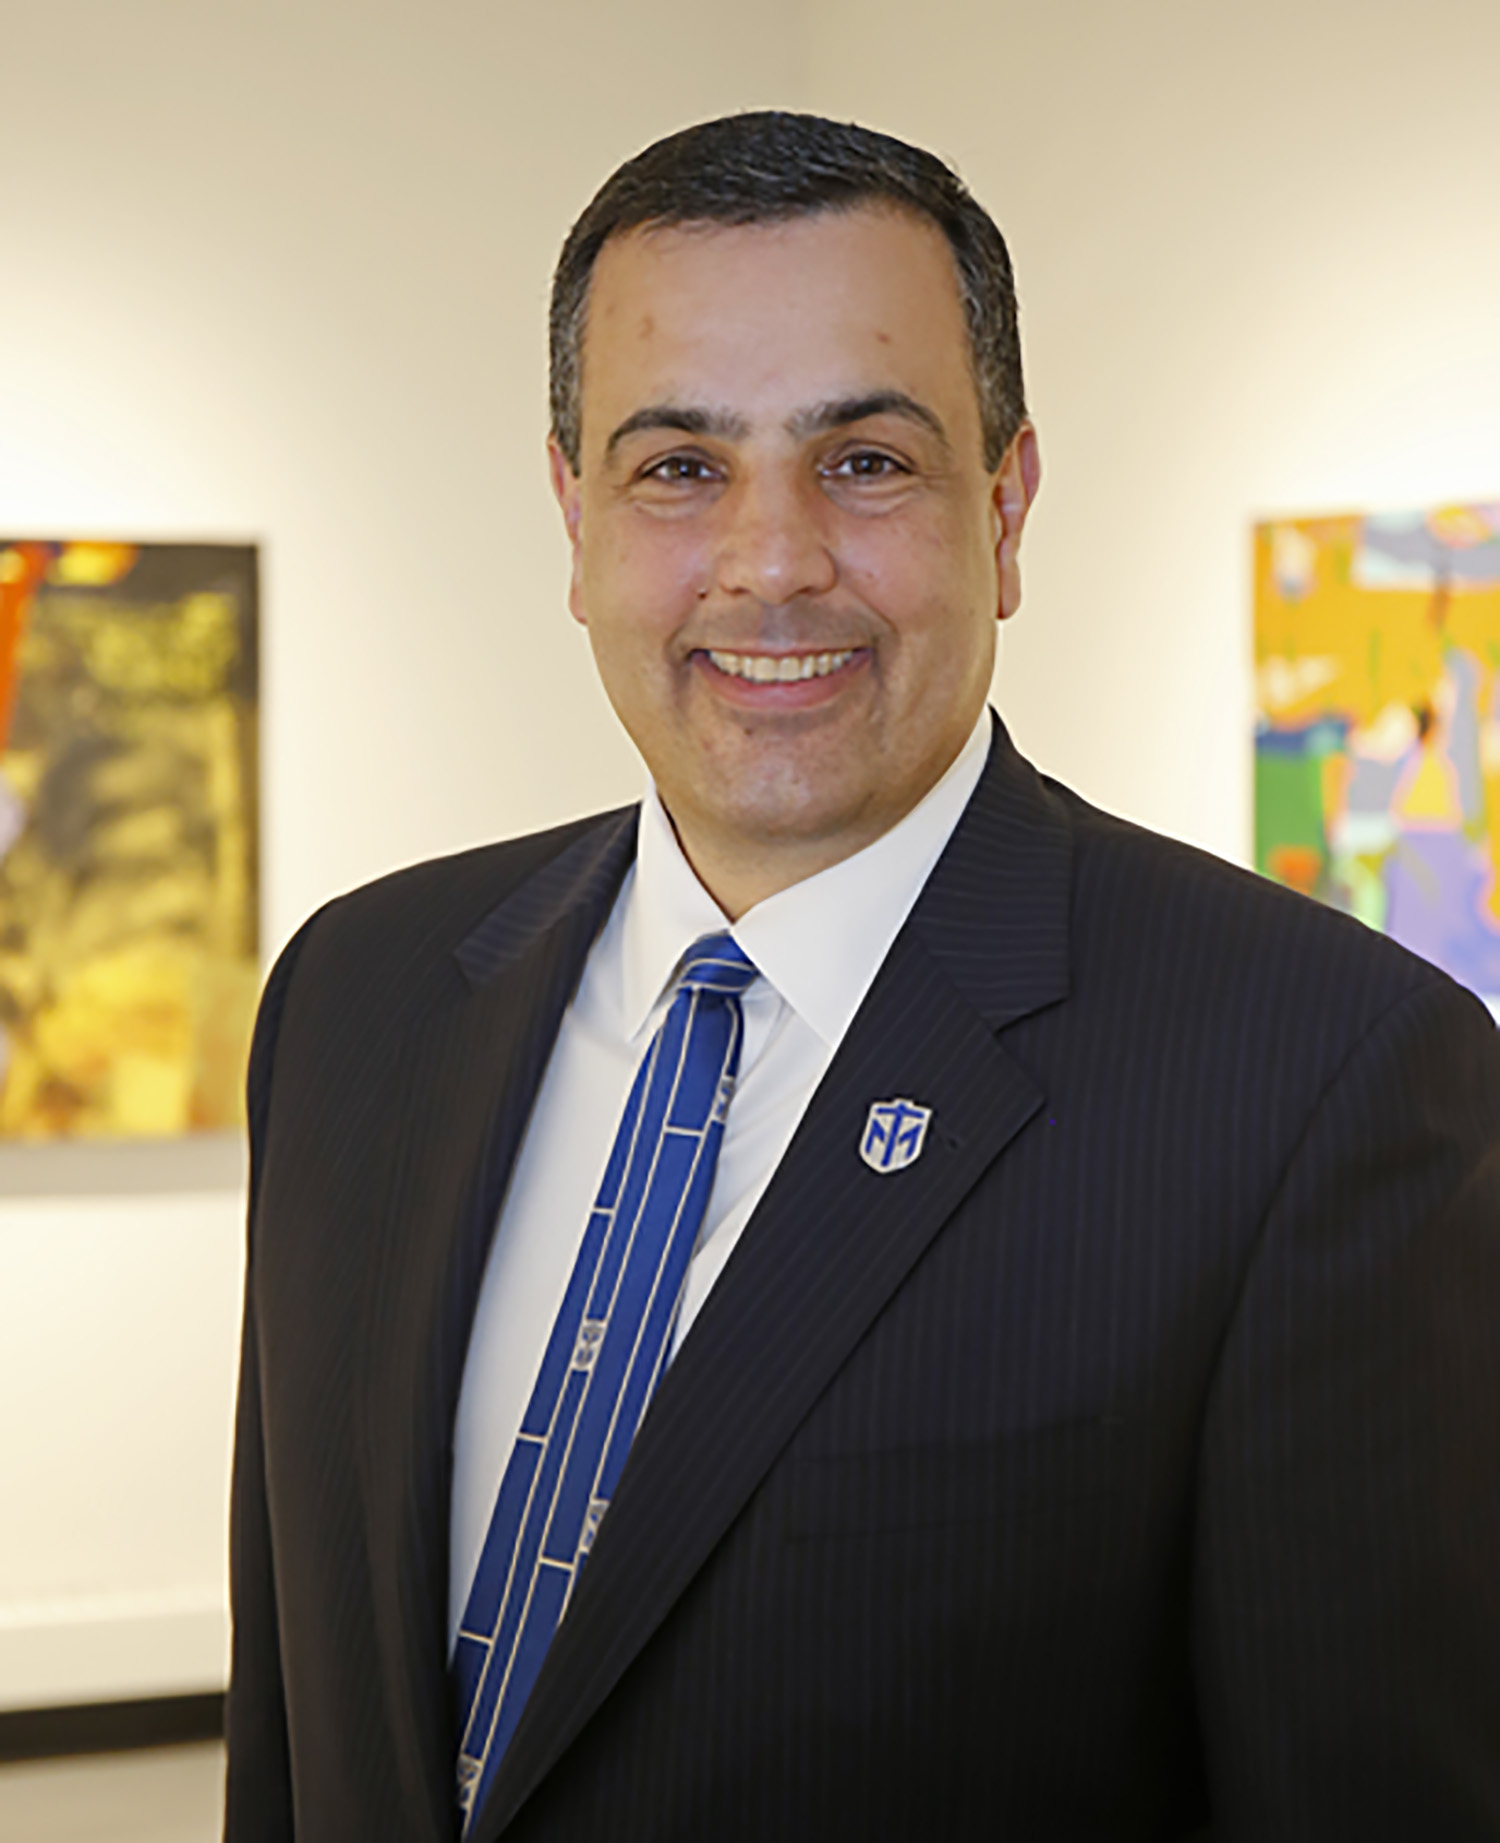 TMU welcomes Dr. Chillo as 15th president